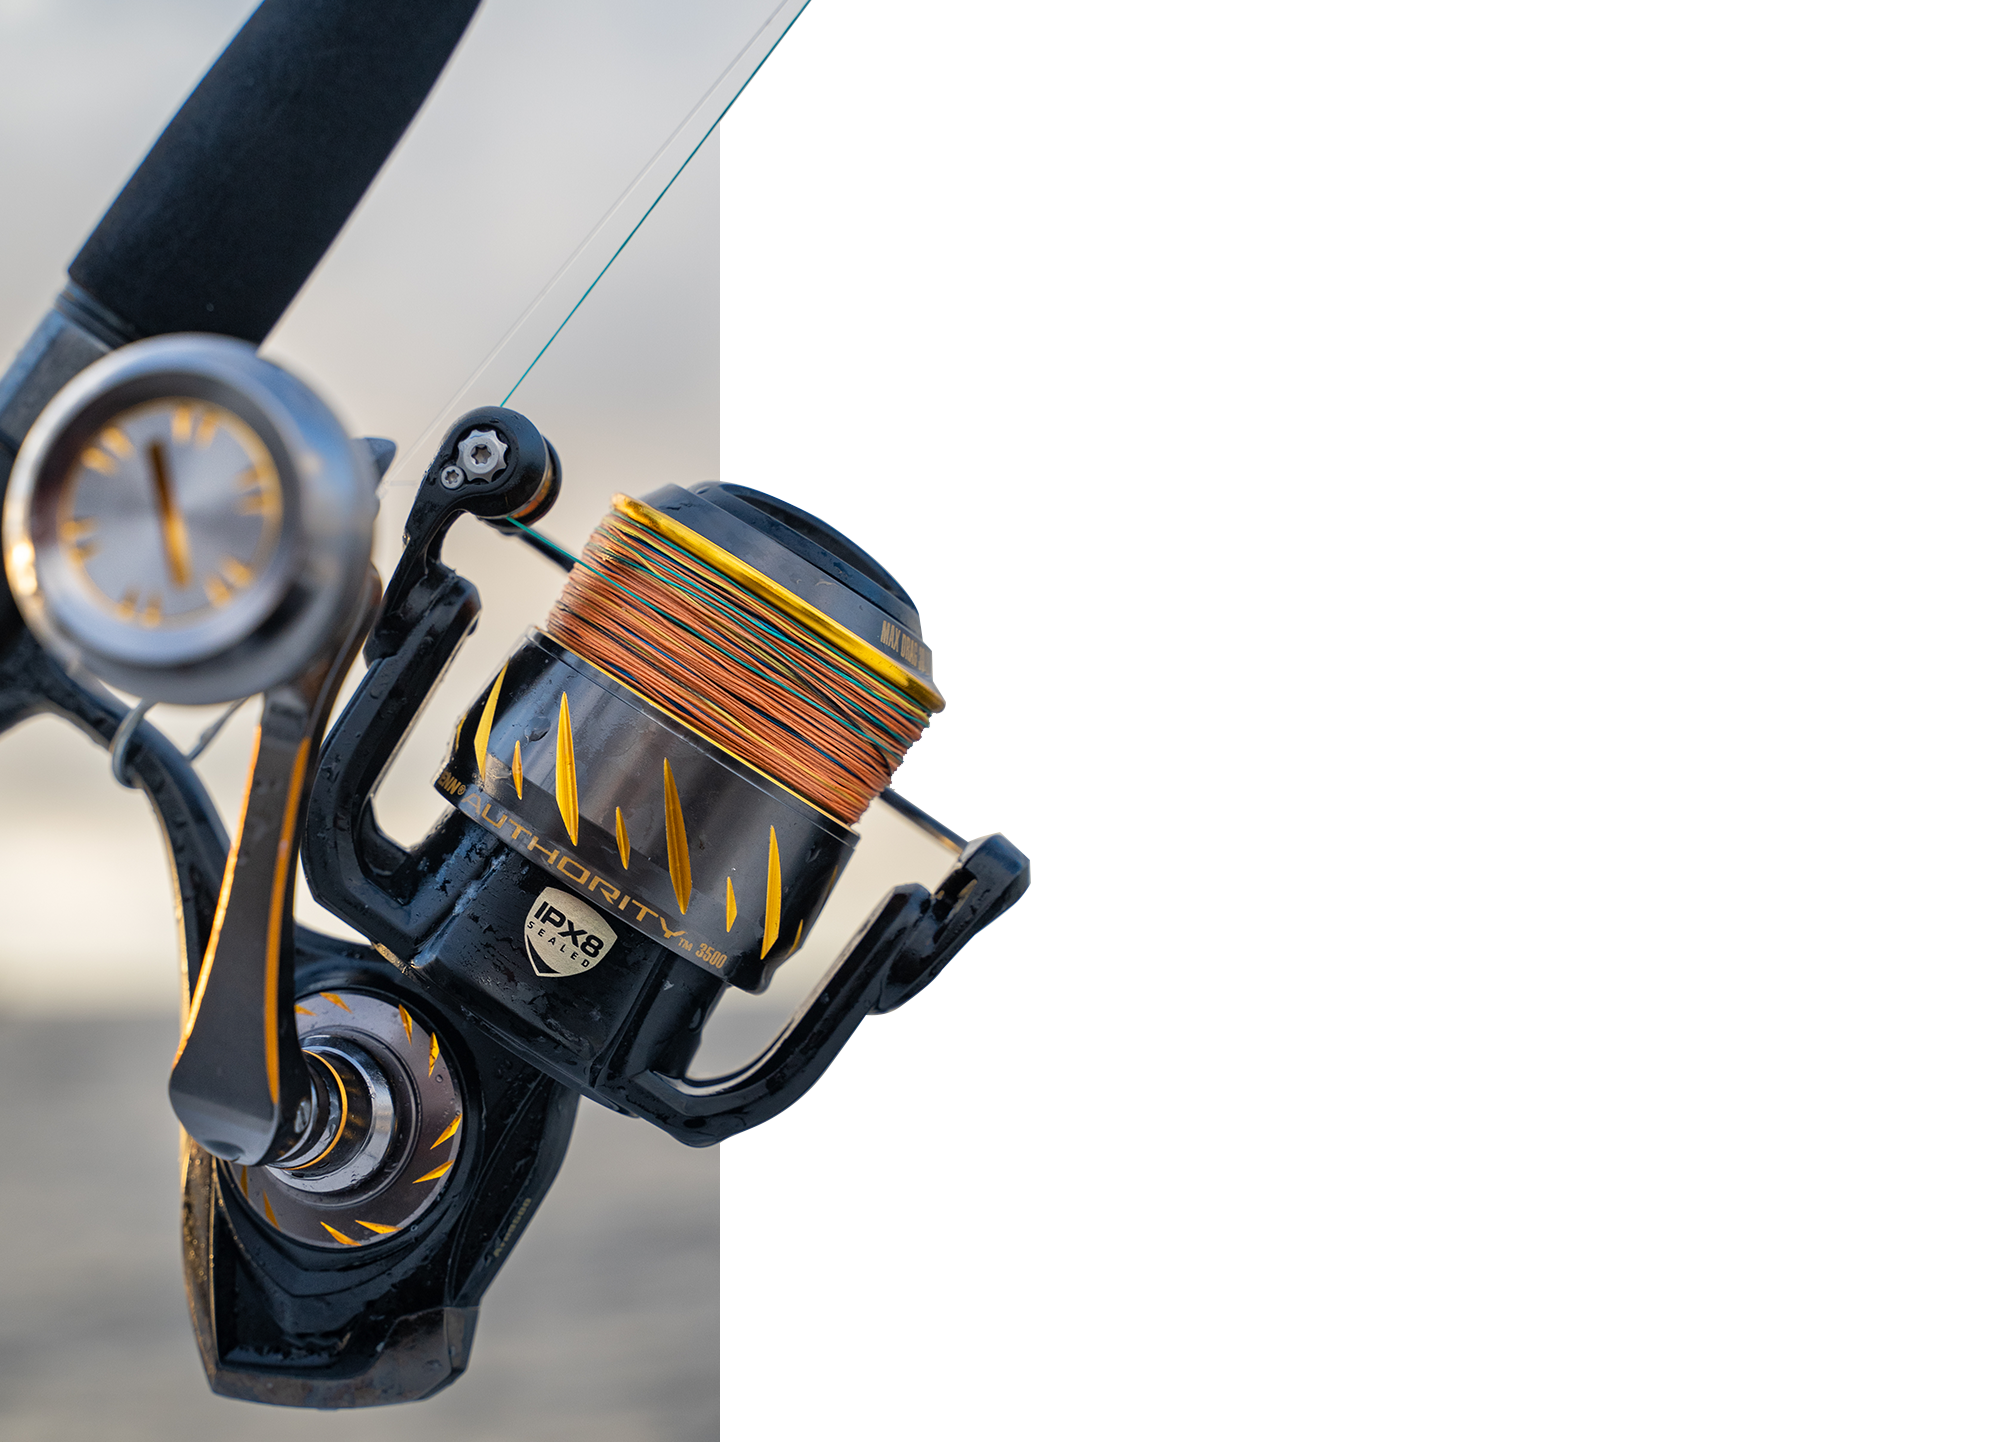 Penn Authority Spinning Reel 10500 ATH10500, 55% OFF